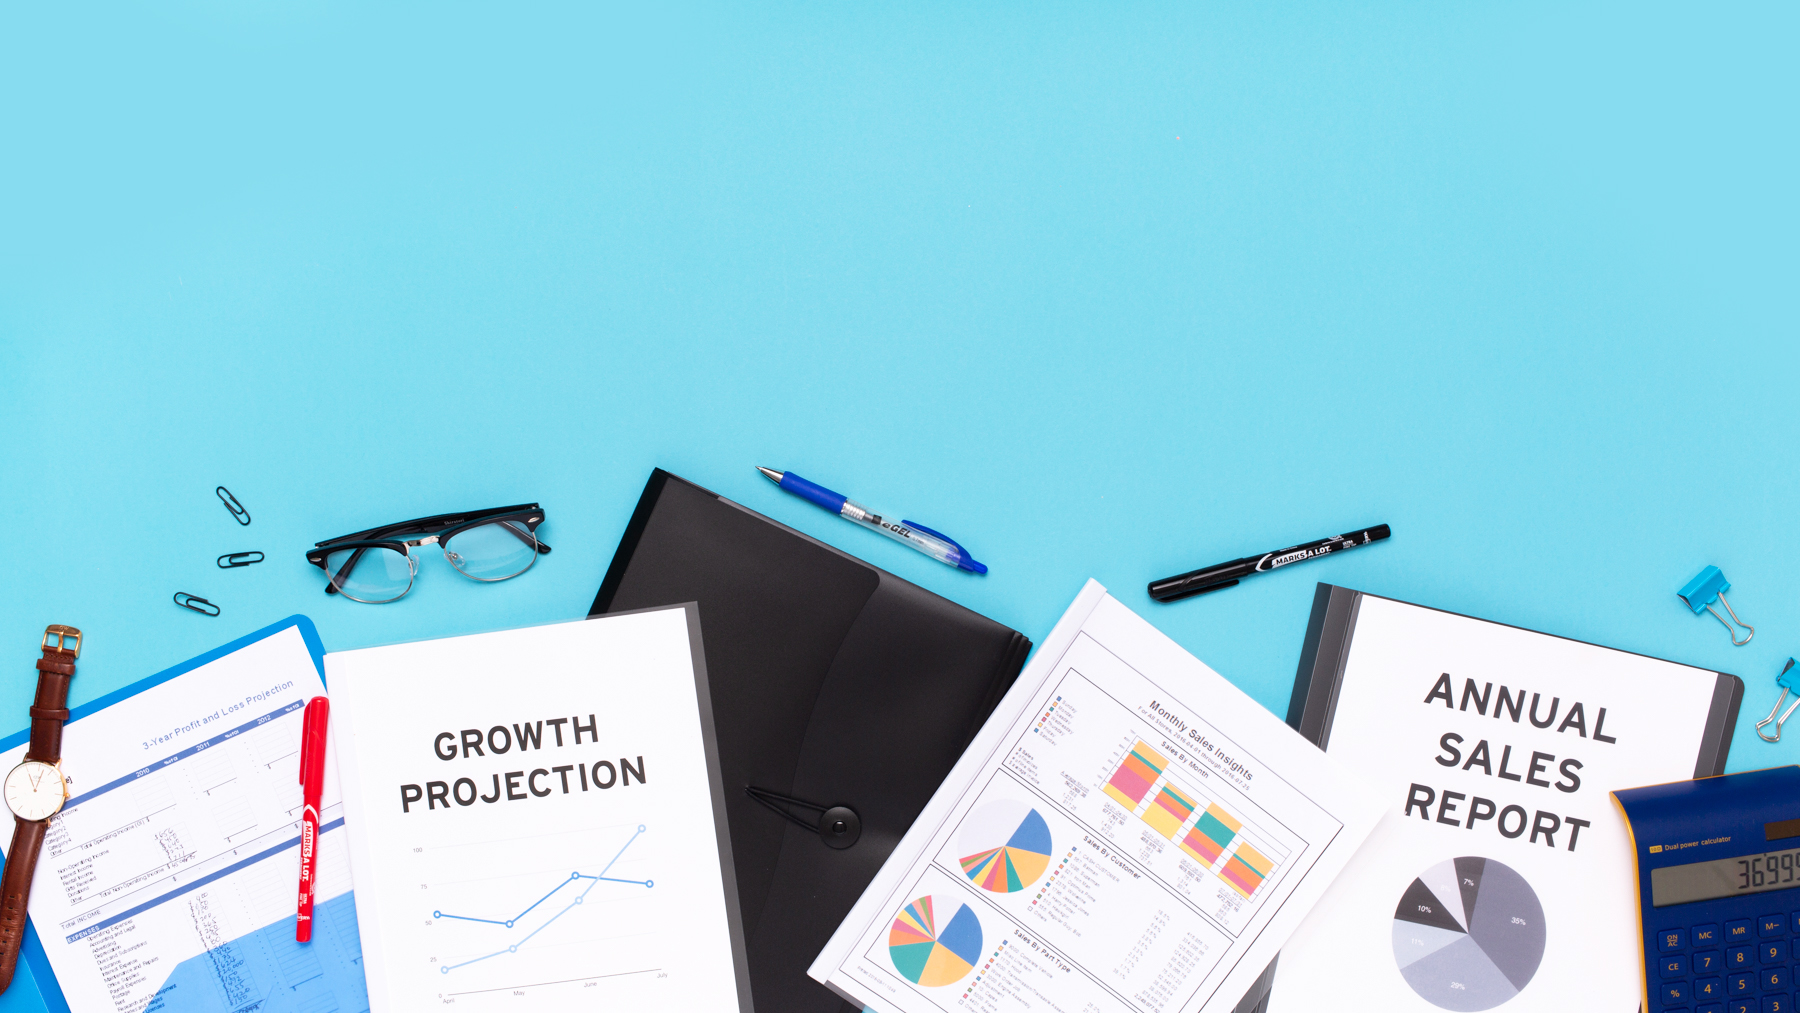 flatlay of business docutments: growth projection, sales reports, folders, office supplies